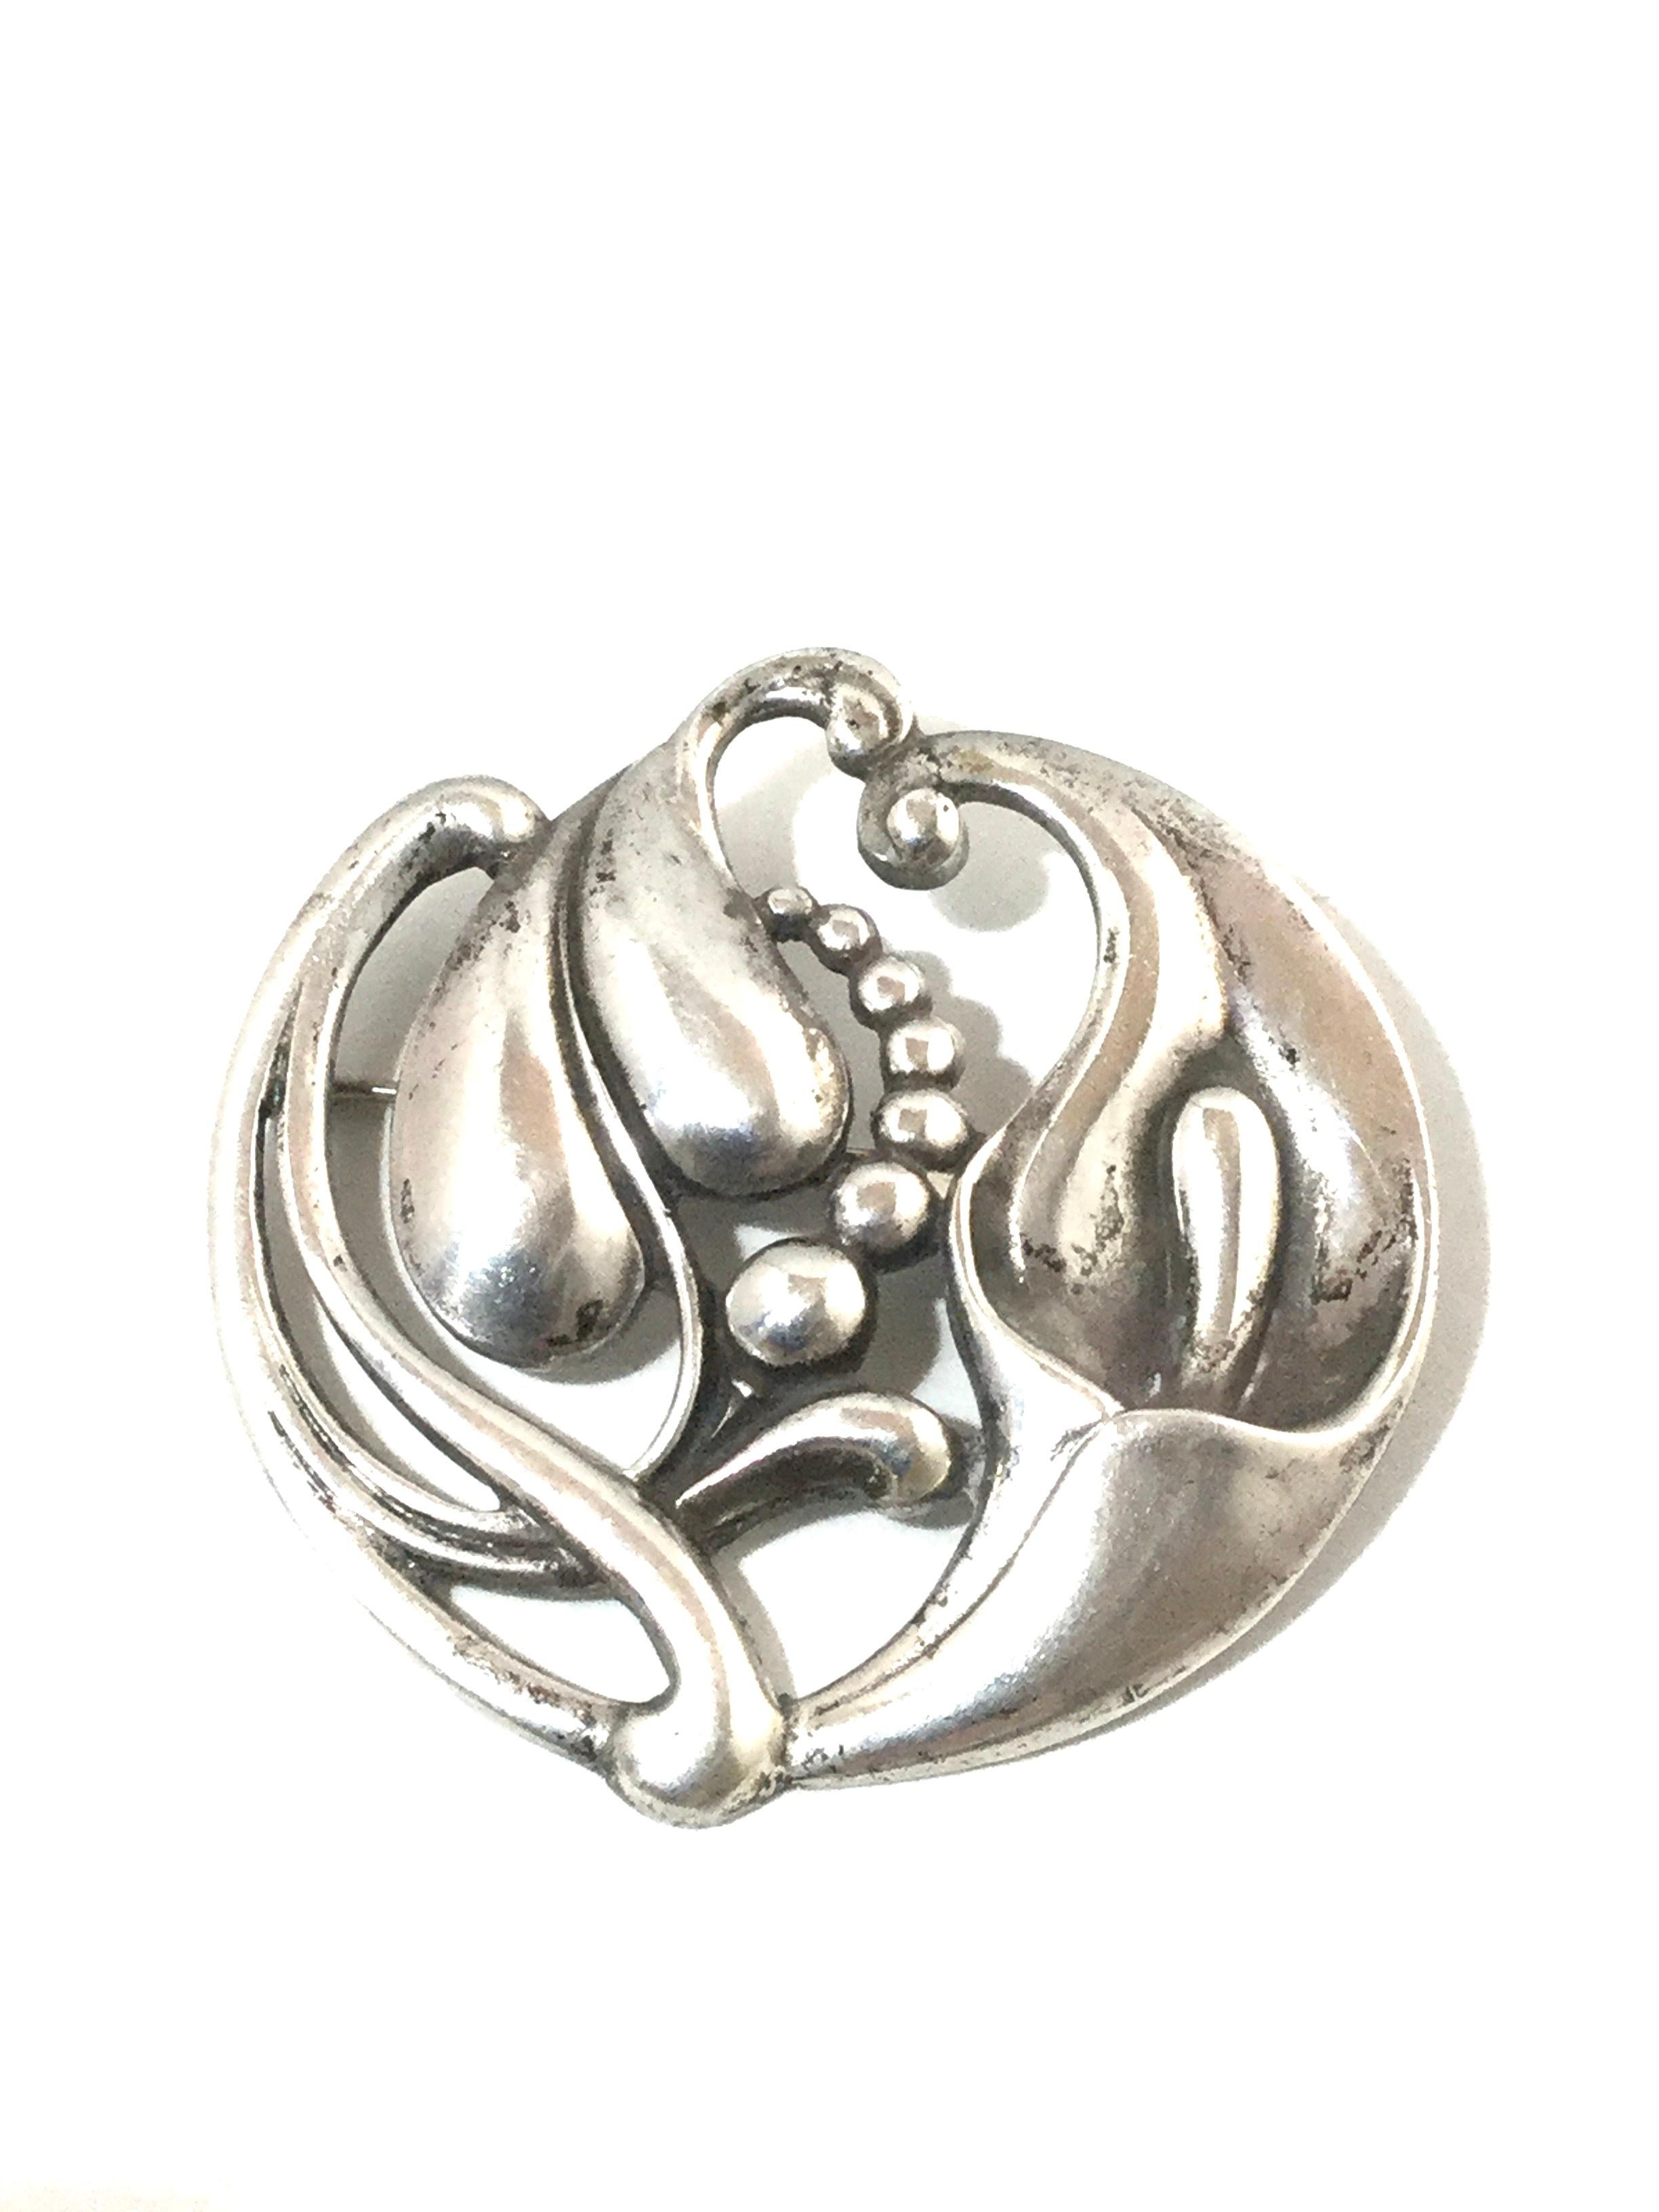 Viking Craft Art Deco Sterling Calla Lily Pin

A lovely sterling silver brooch/pin by Viking Craft. The heavy sterling pin has a beautiful stylized design of a calla lily and leaf with a graceful swirling flow. The lily creates the frame on one